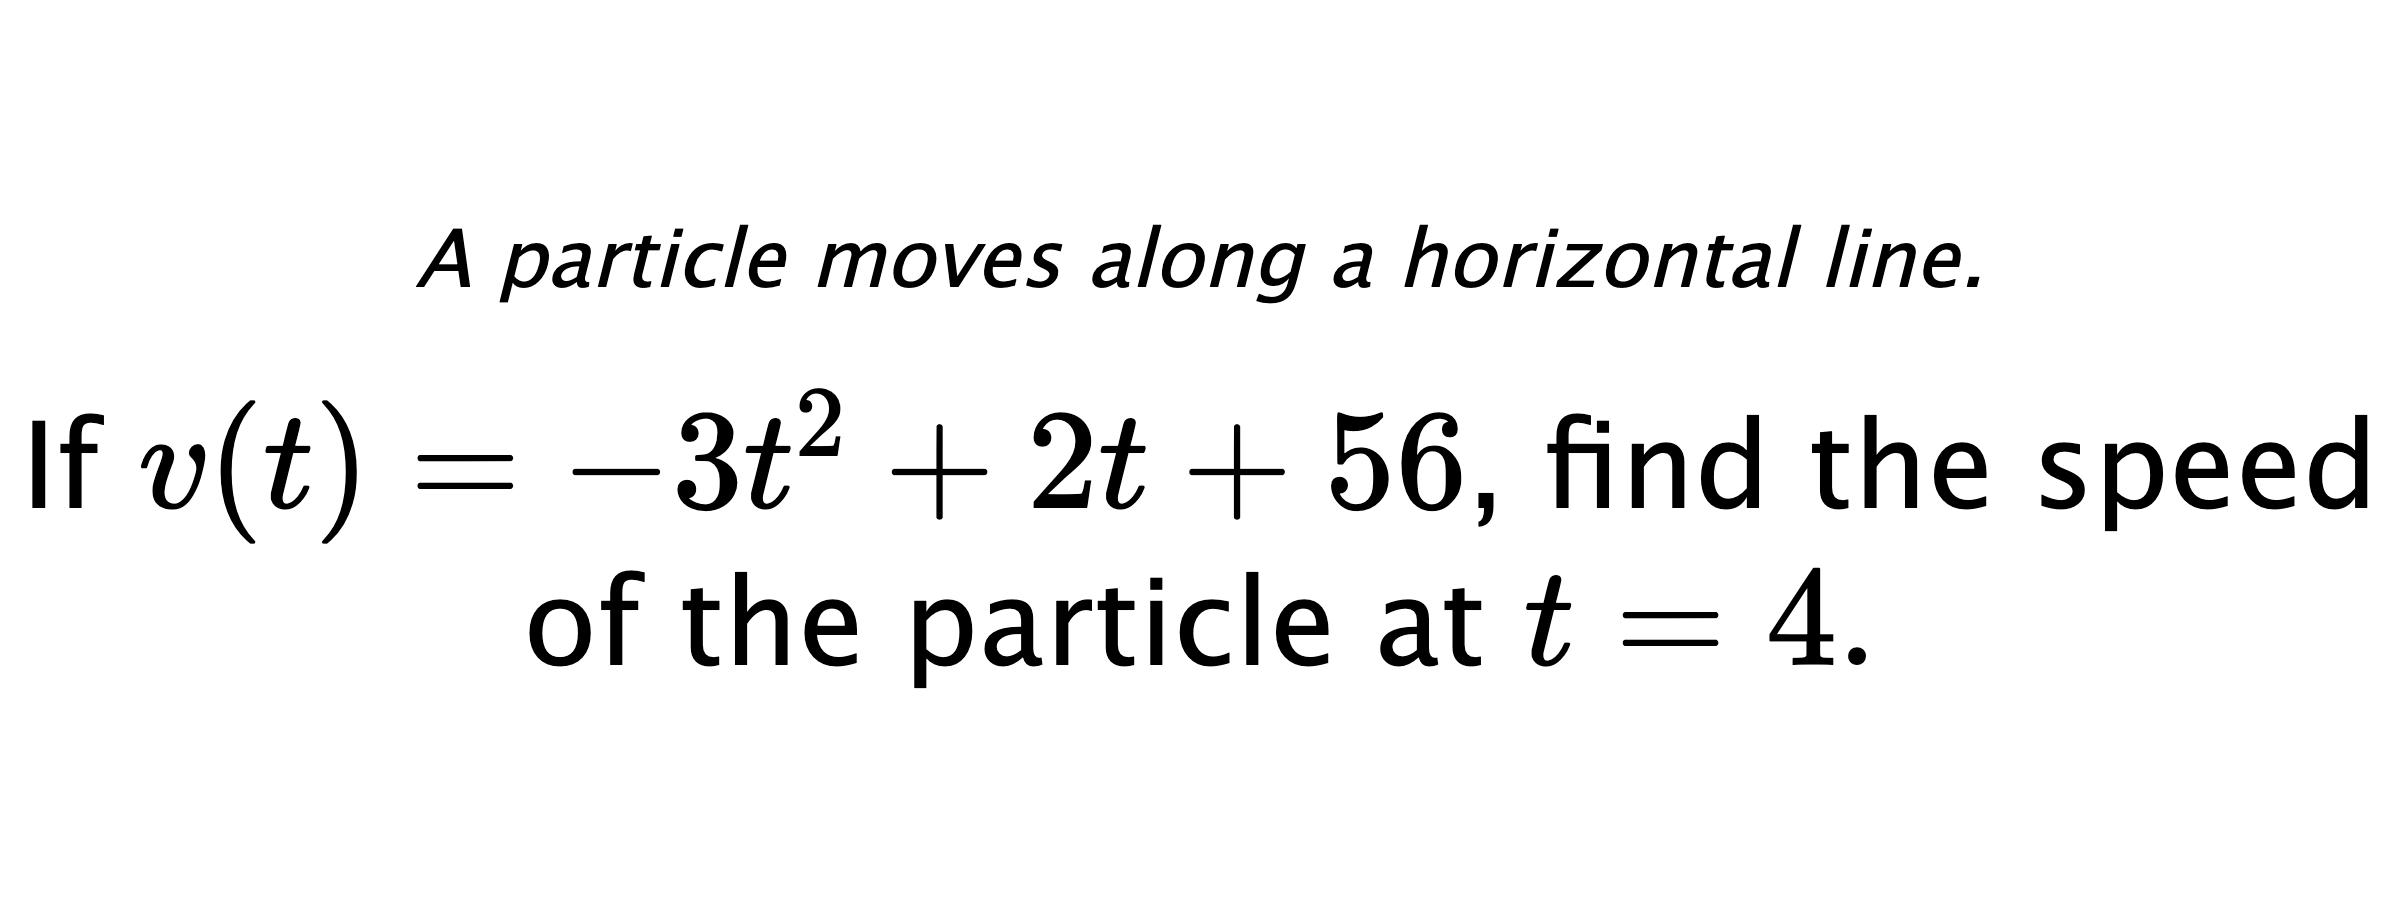 A particle moves along a horizontal line. If $ v(t)=-3t^2+2t+56 $, find the speed of the particle at $ t=4. $